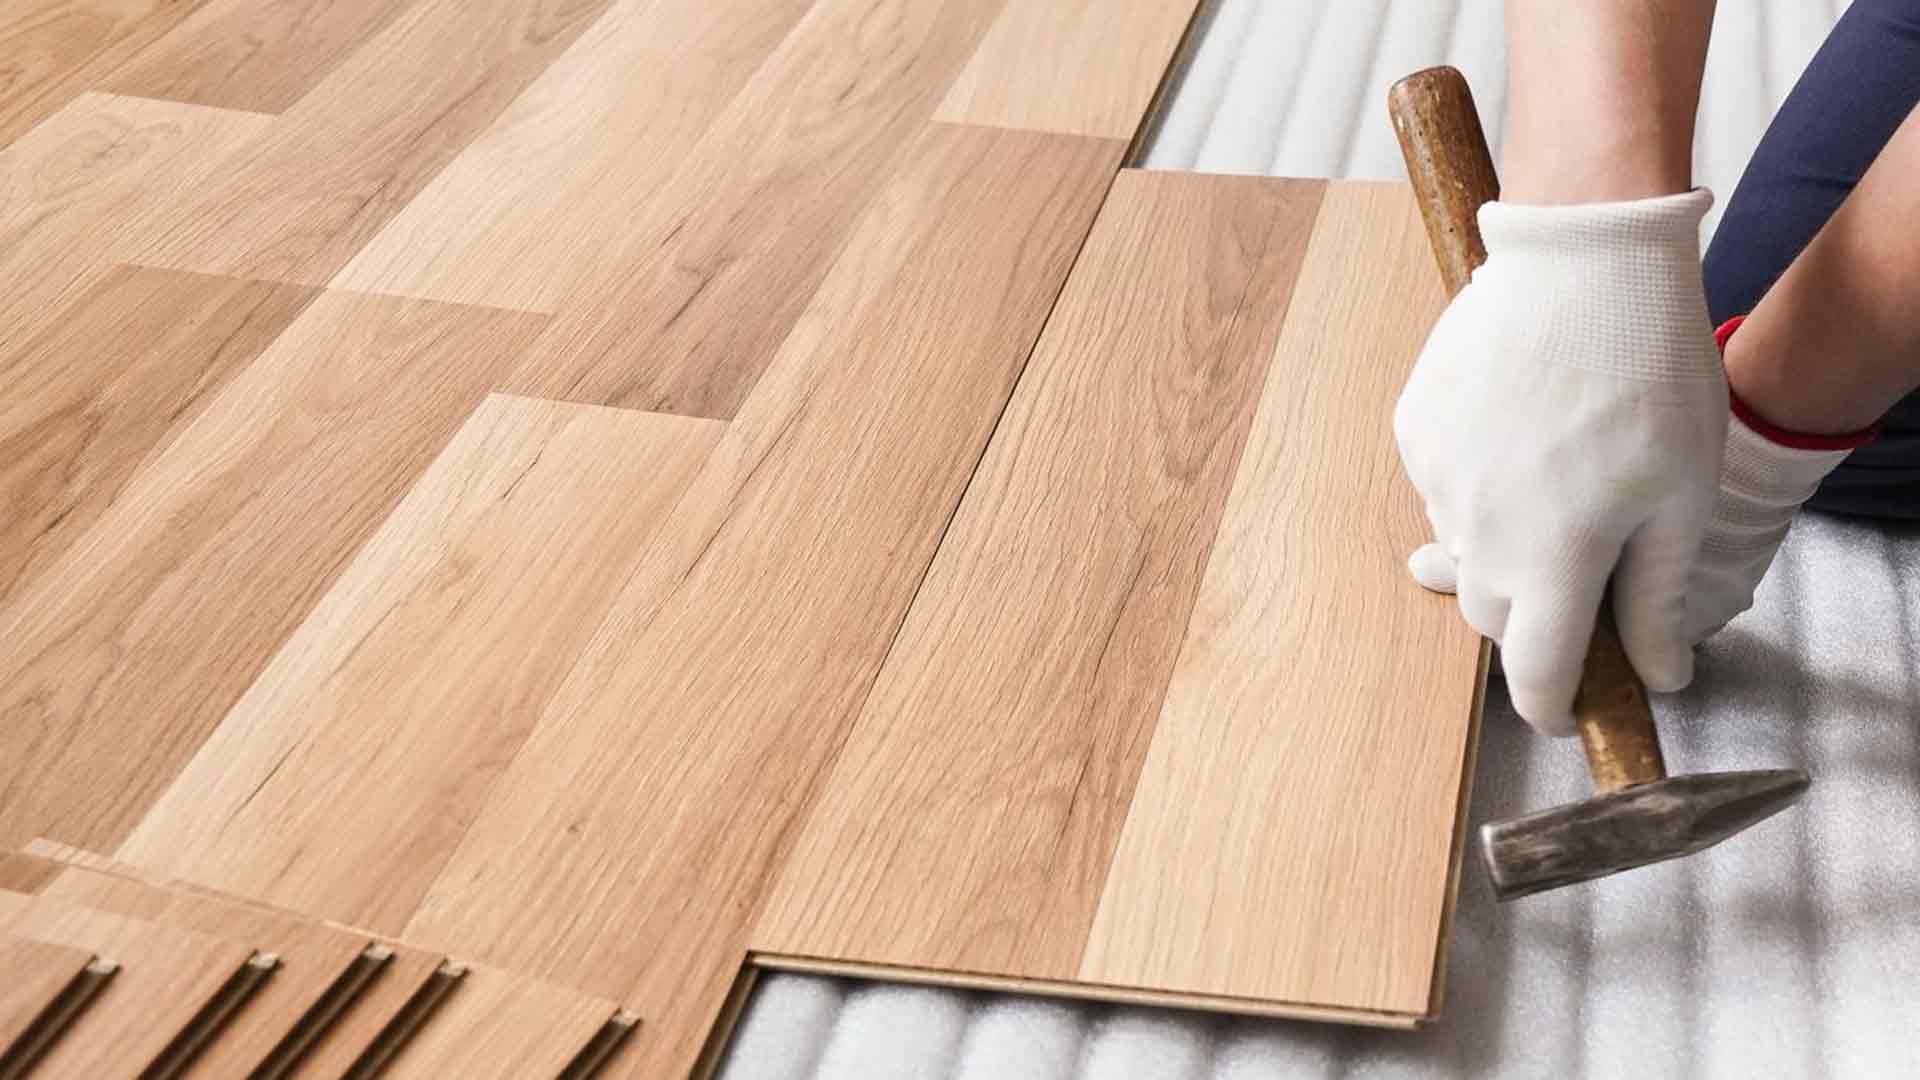 Is Vinyl Flooring The Right Choice For Your Home?